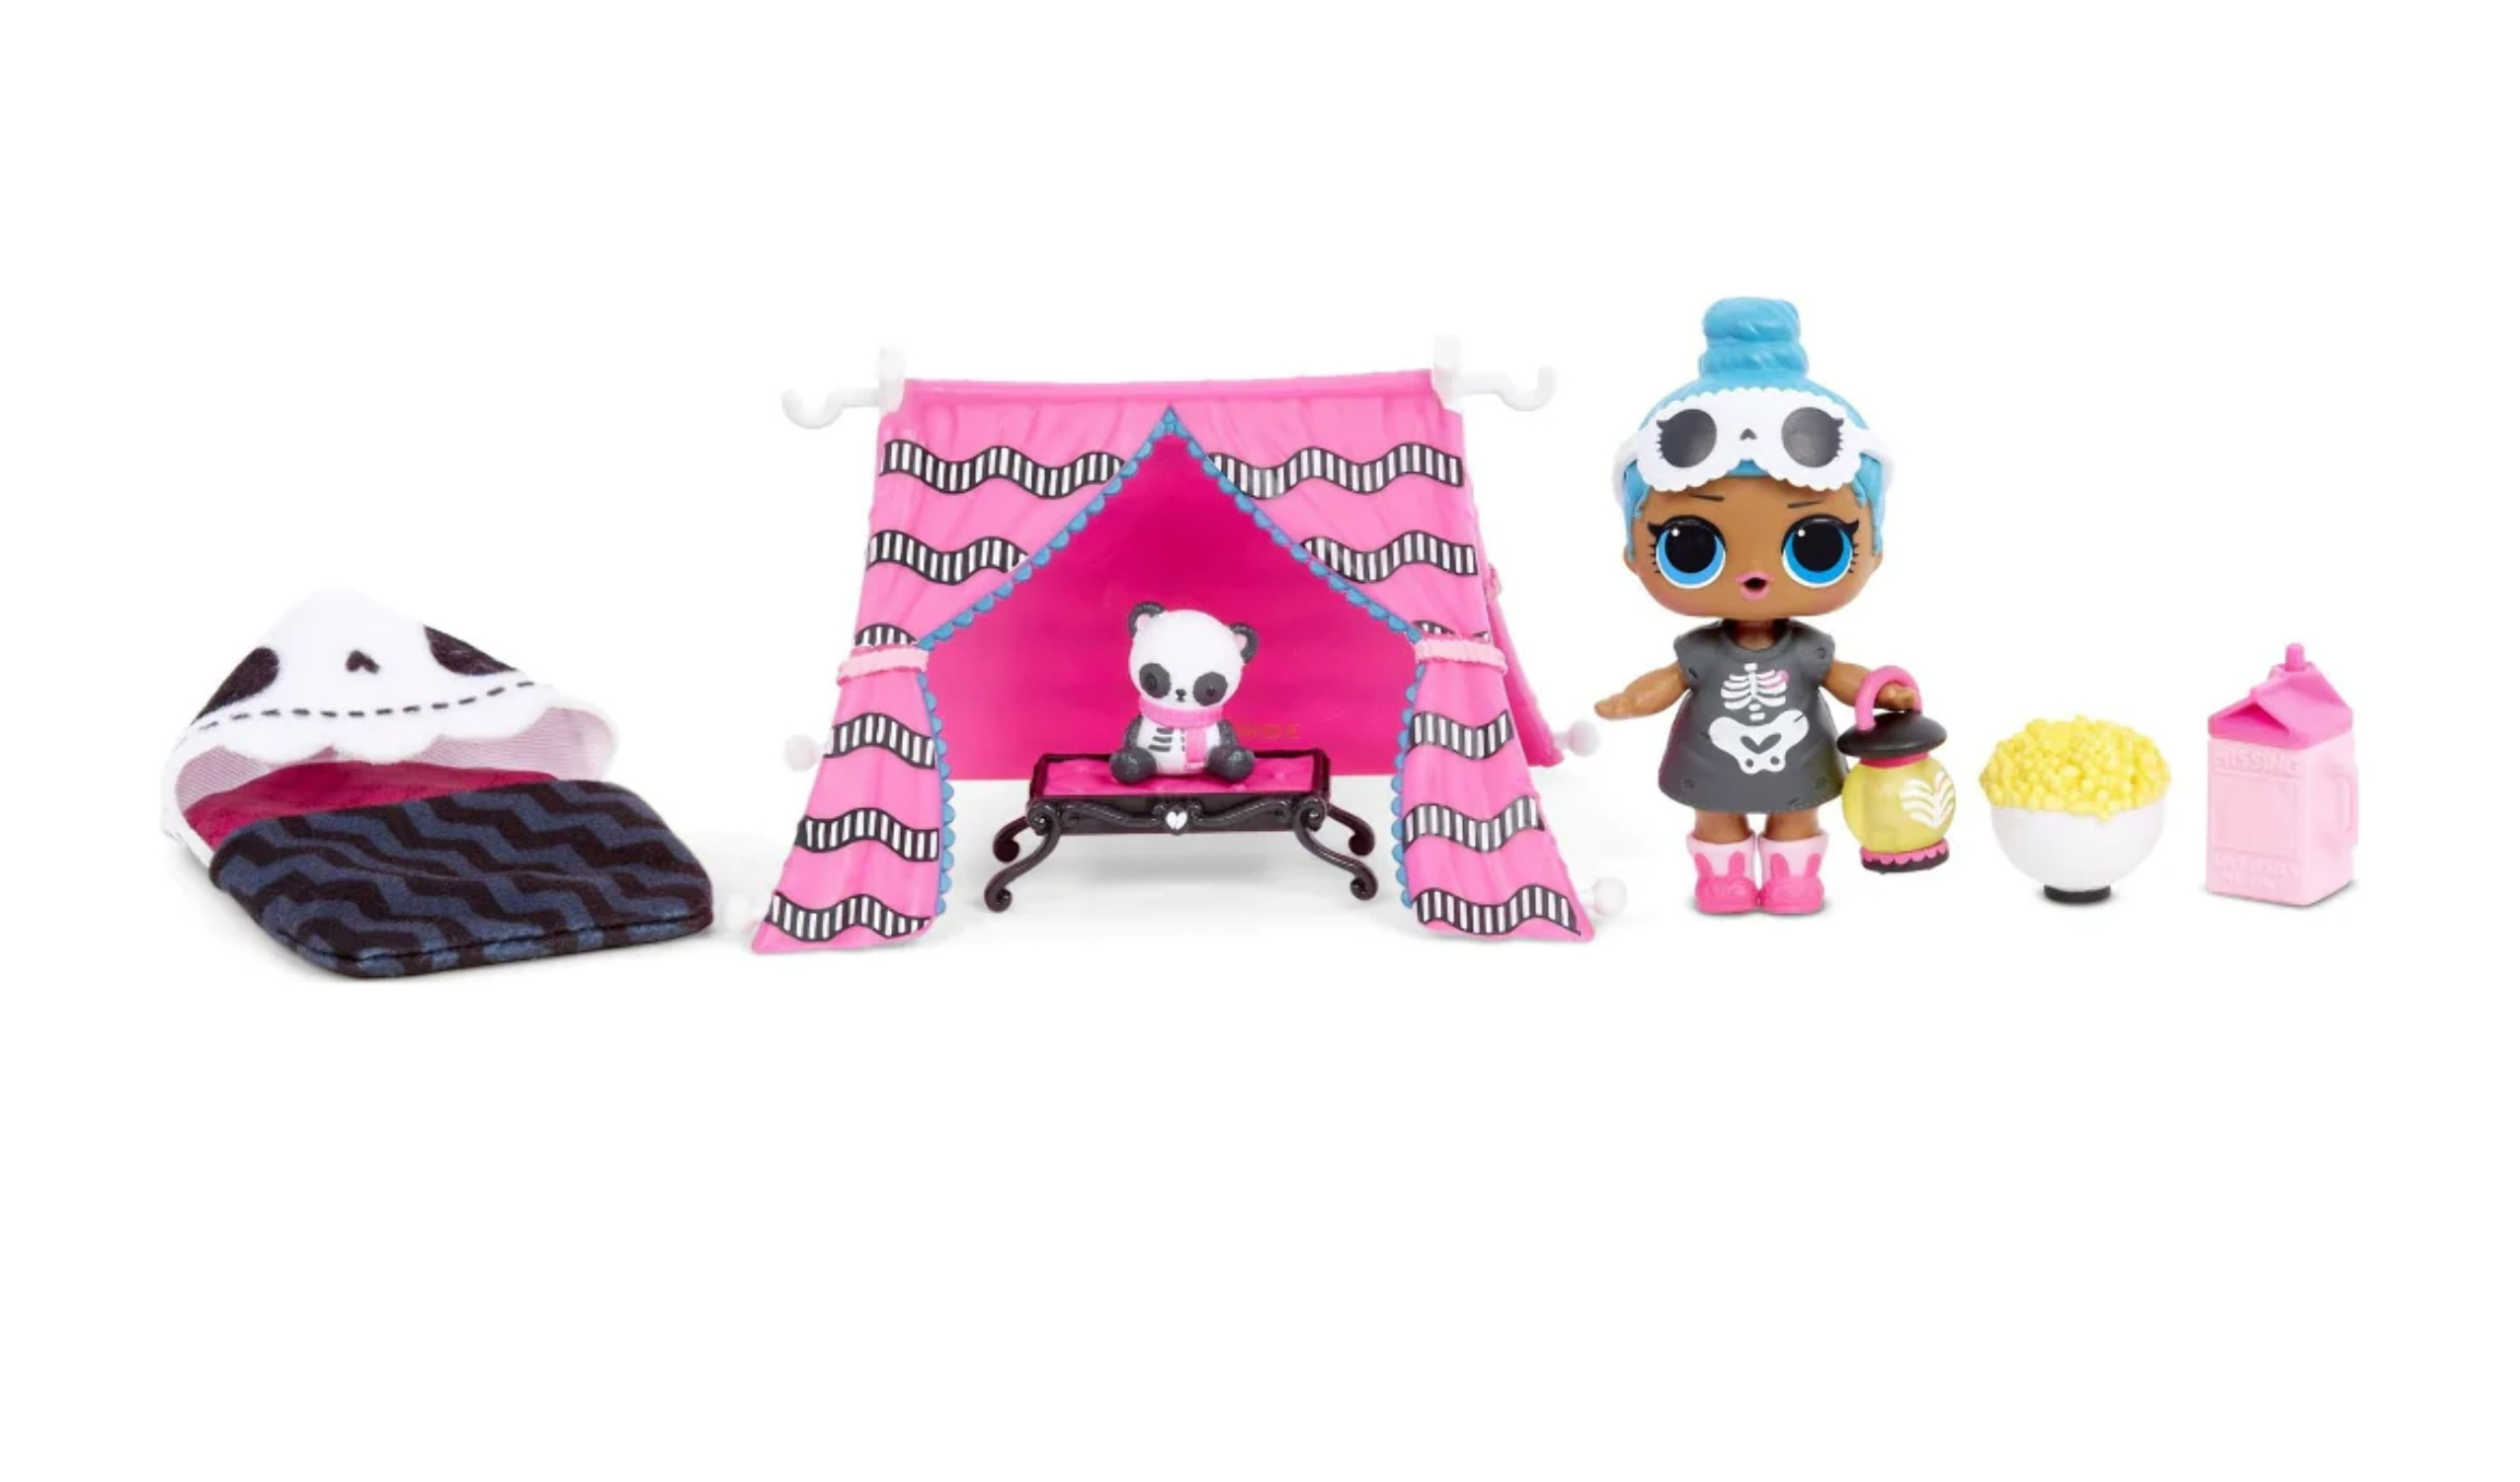 LOL Surprise Furniture Sleepover with Sleepy Bones & 10+ Surprises, Great Gift for Kids Ages 4+ - image 3 of 3